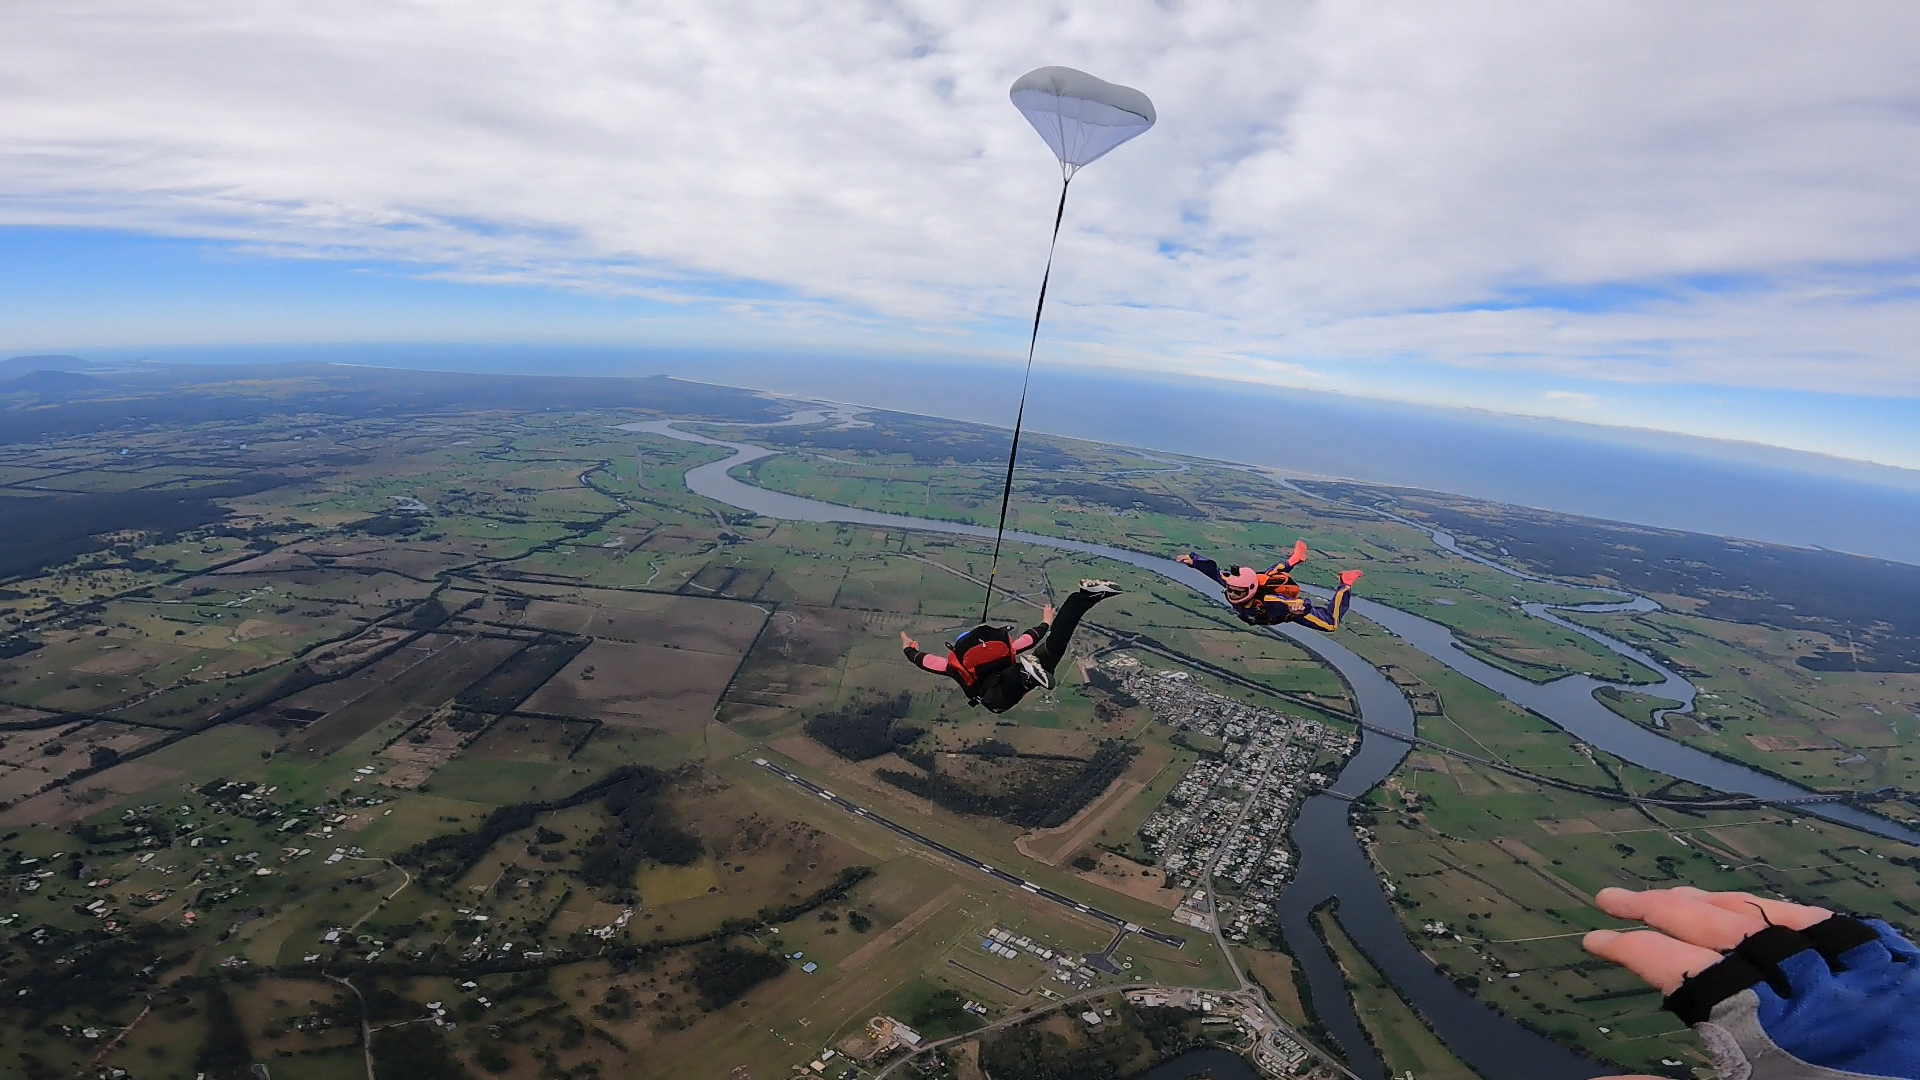 Skydiving Lessons - Skydiving in Taree, NSW